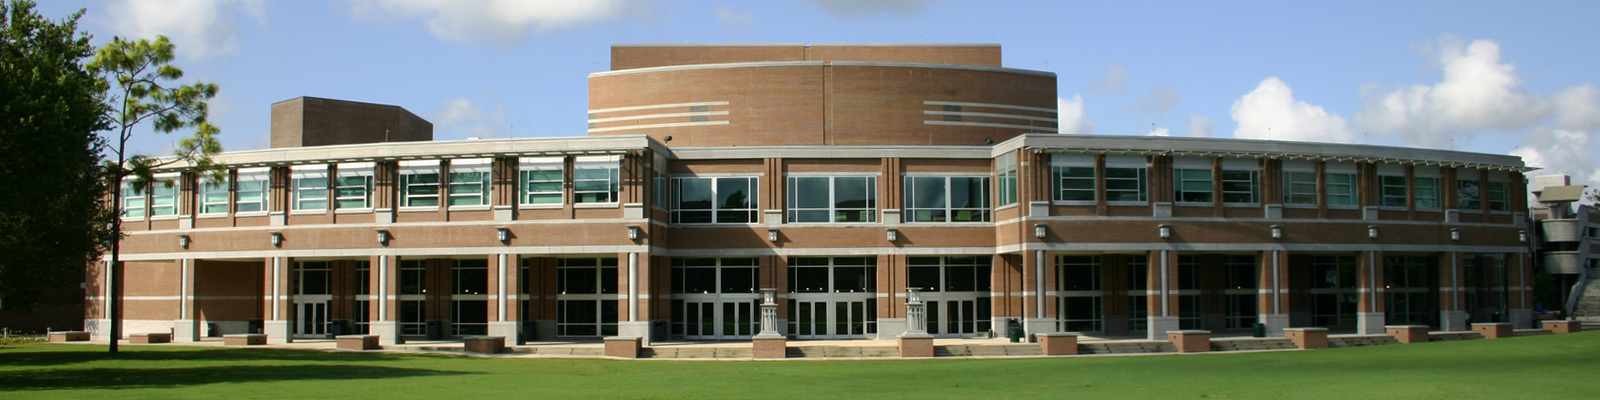 fine arts building exterior and green lawn